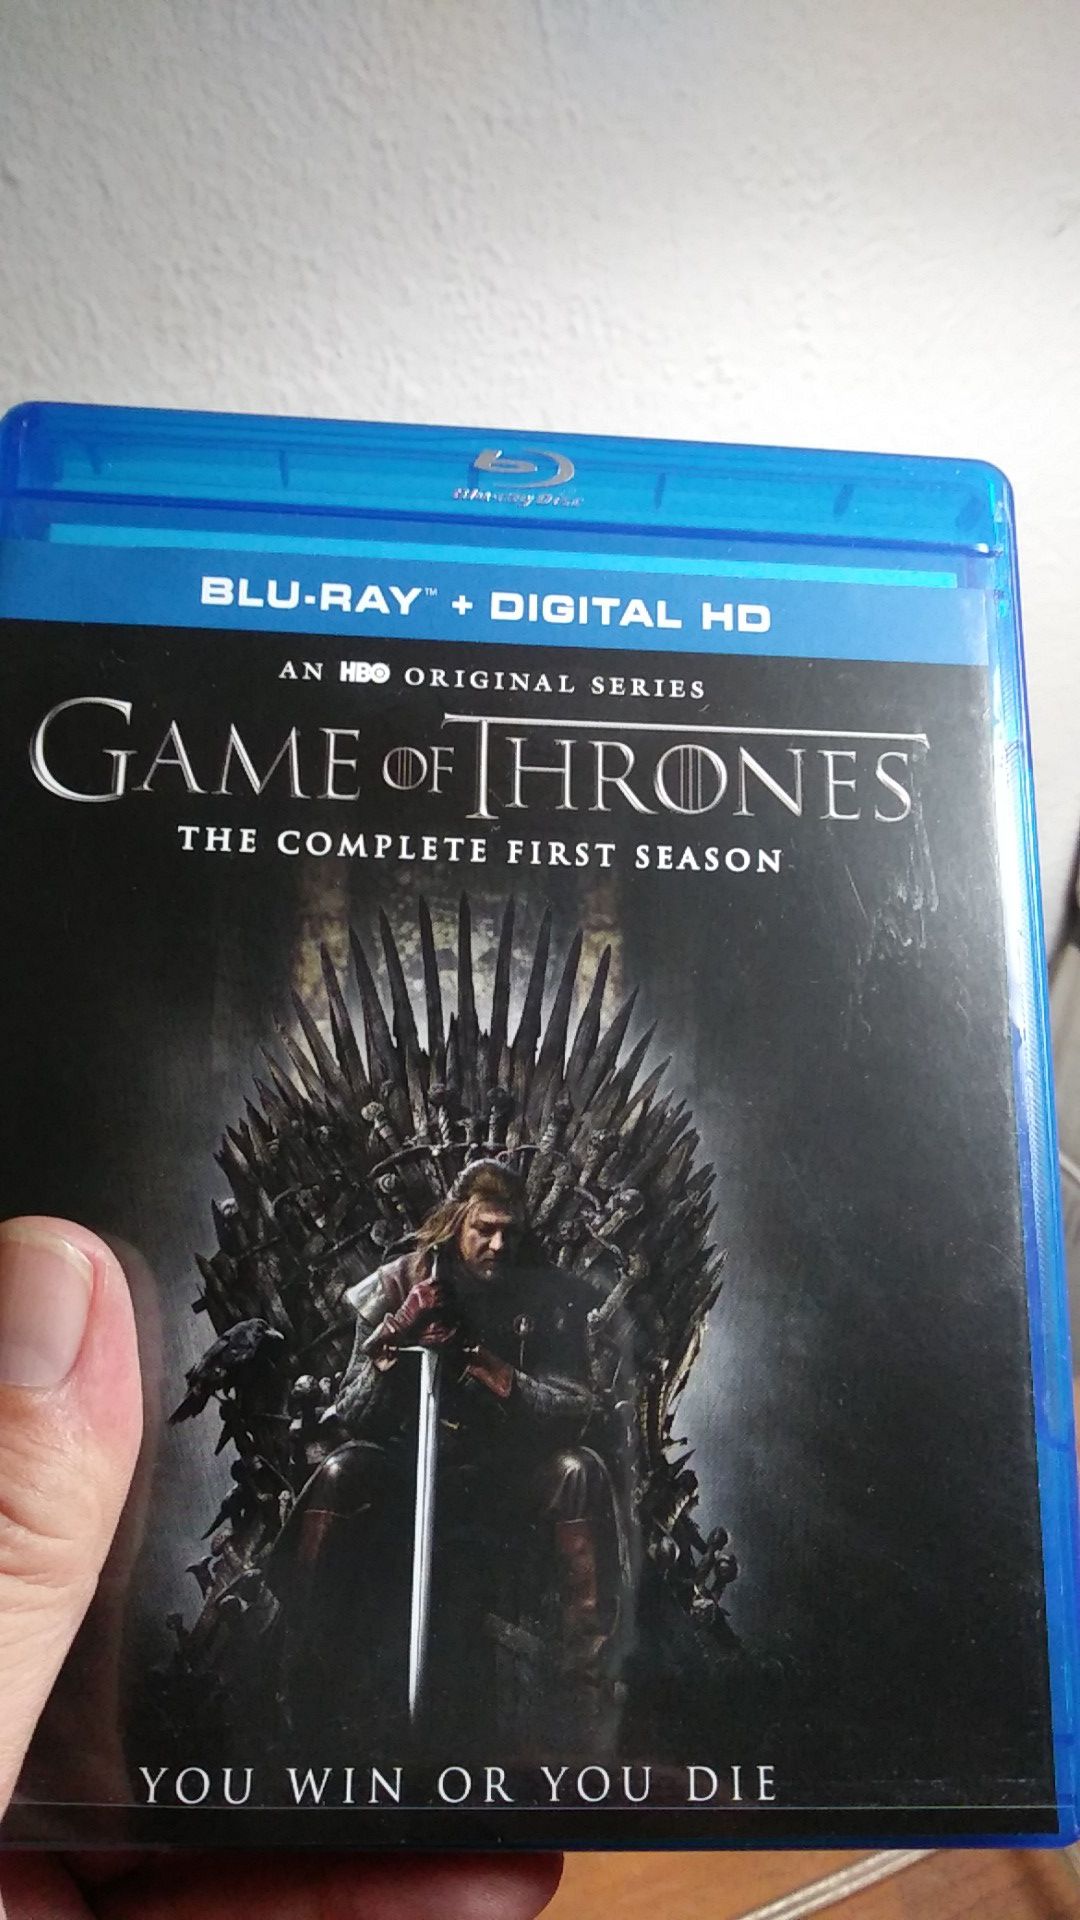 Game of Thrones Blu-ray first season